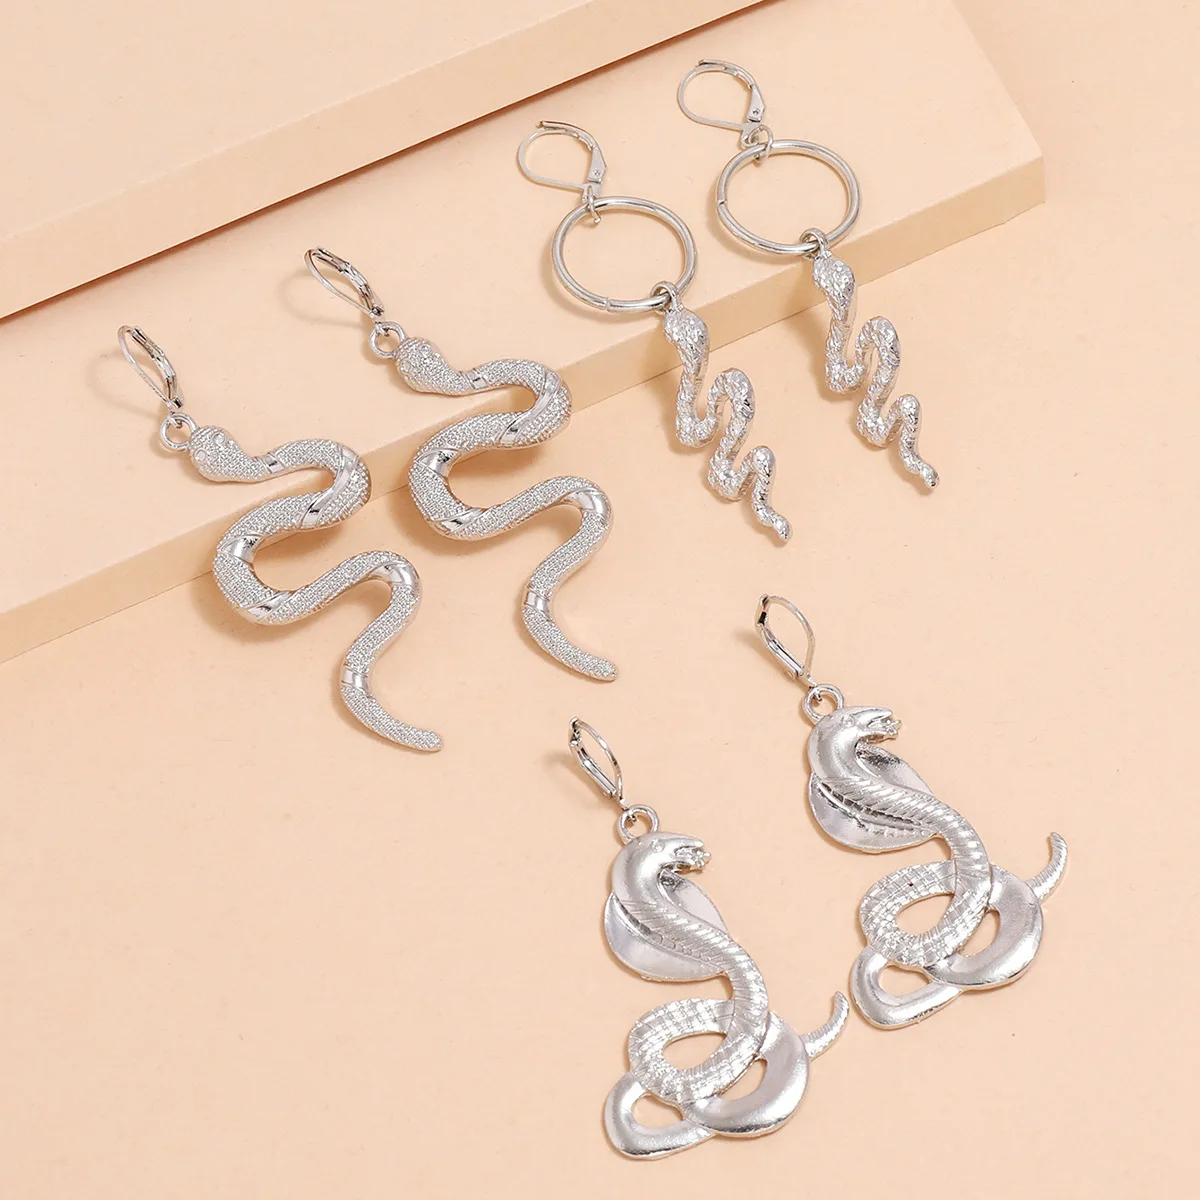 

Stillgirl 3Pairs Punk Silver Color Snake Unusual Pendant Earrings for Women Hip Pop Animal Hoop Set Couple Fashion Jewelry Gift